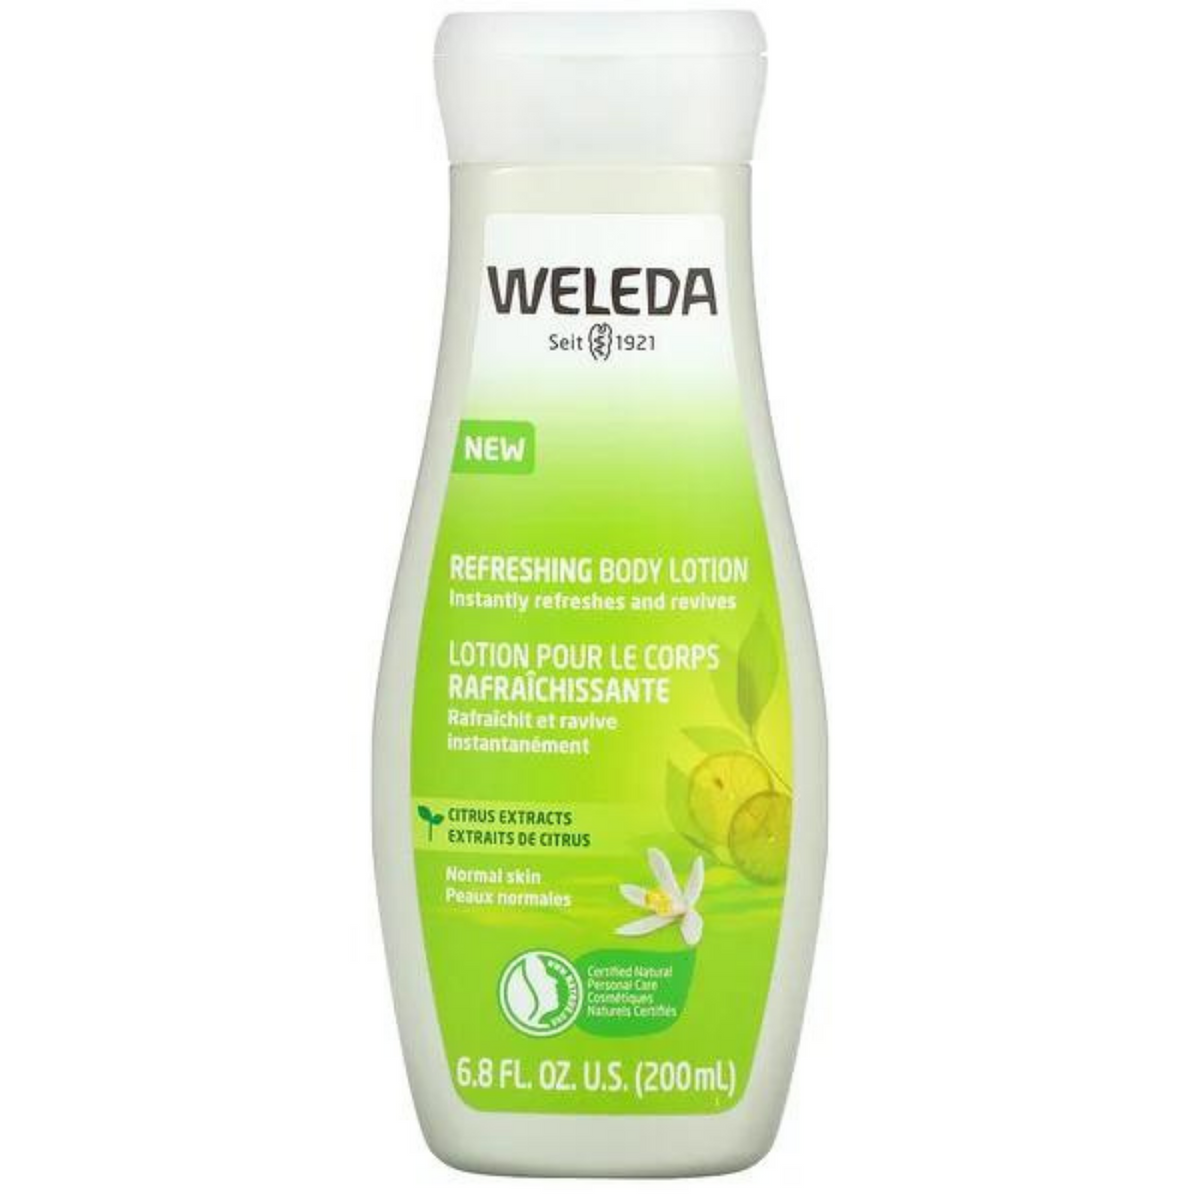 Primary image of Refreshing Body Lotion